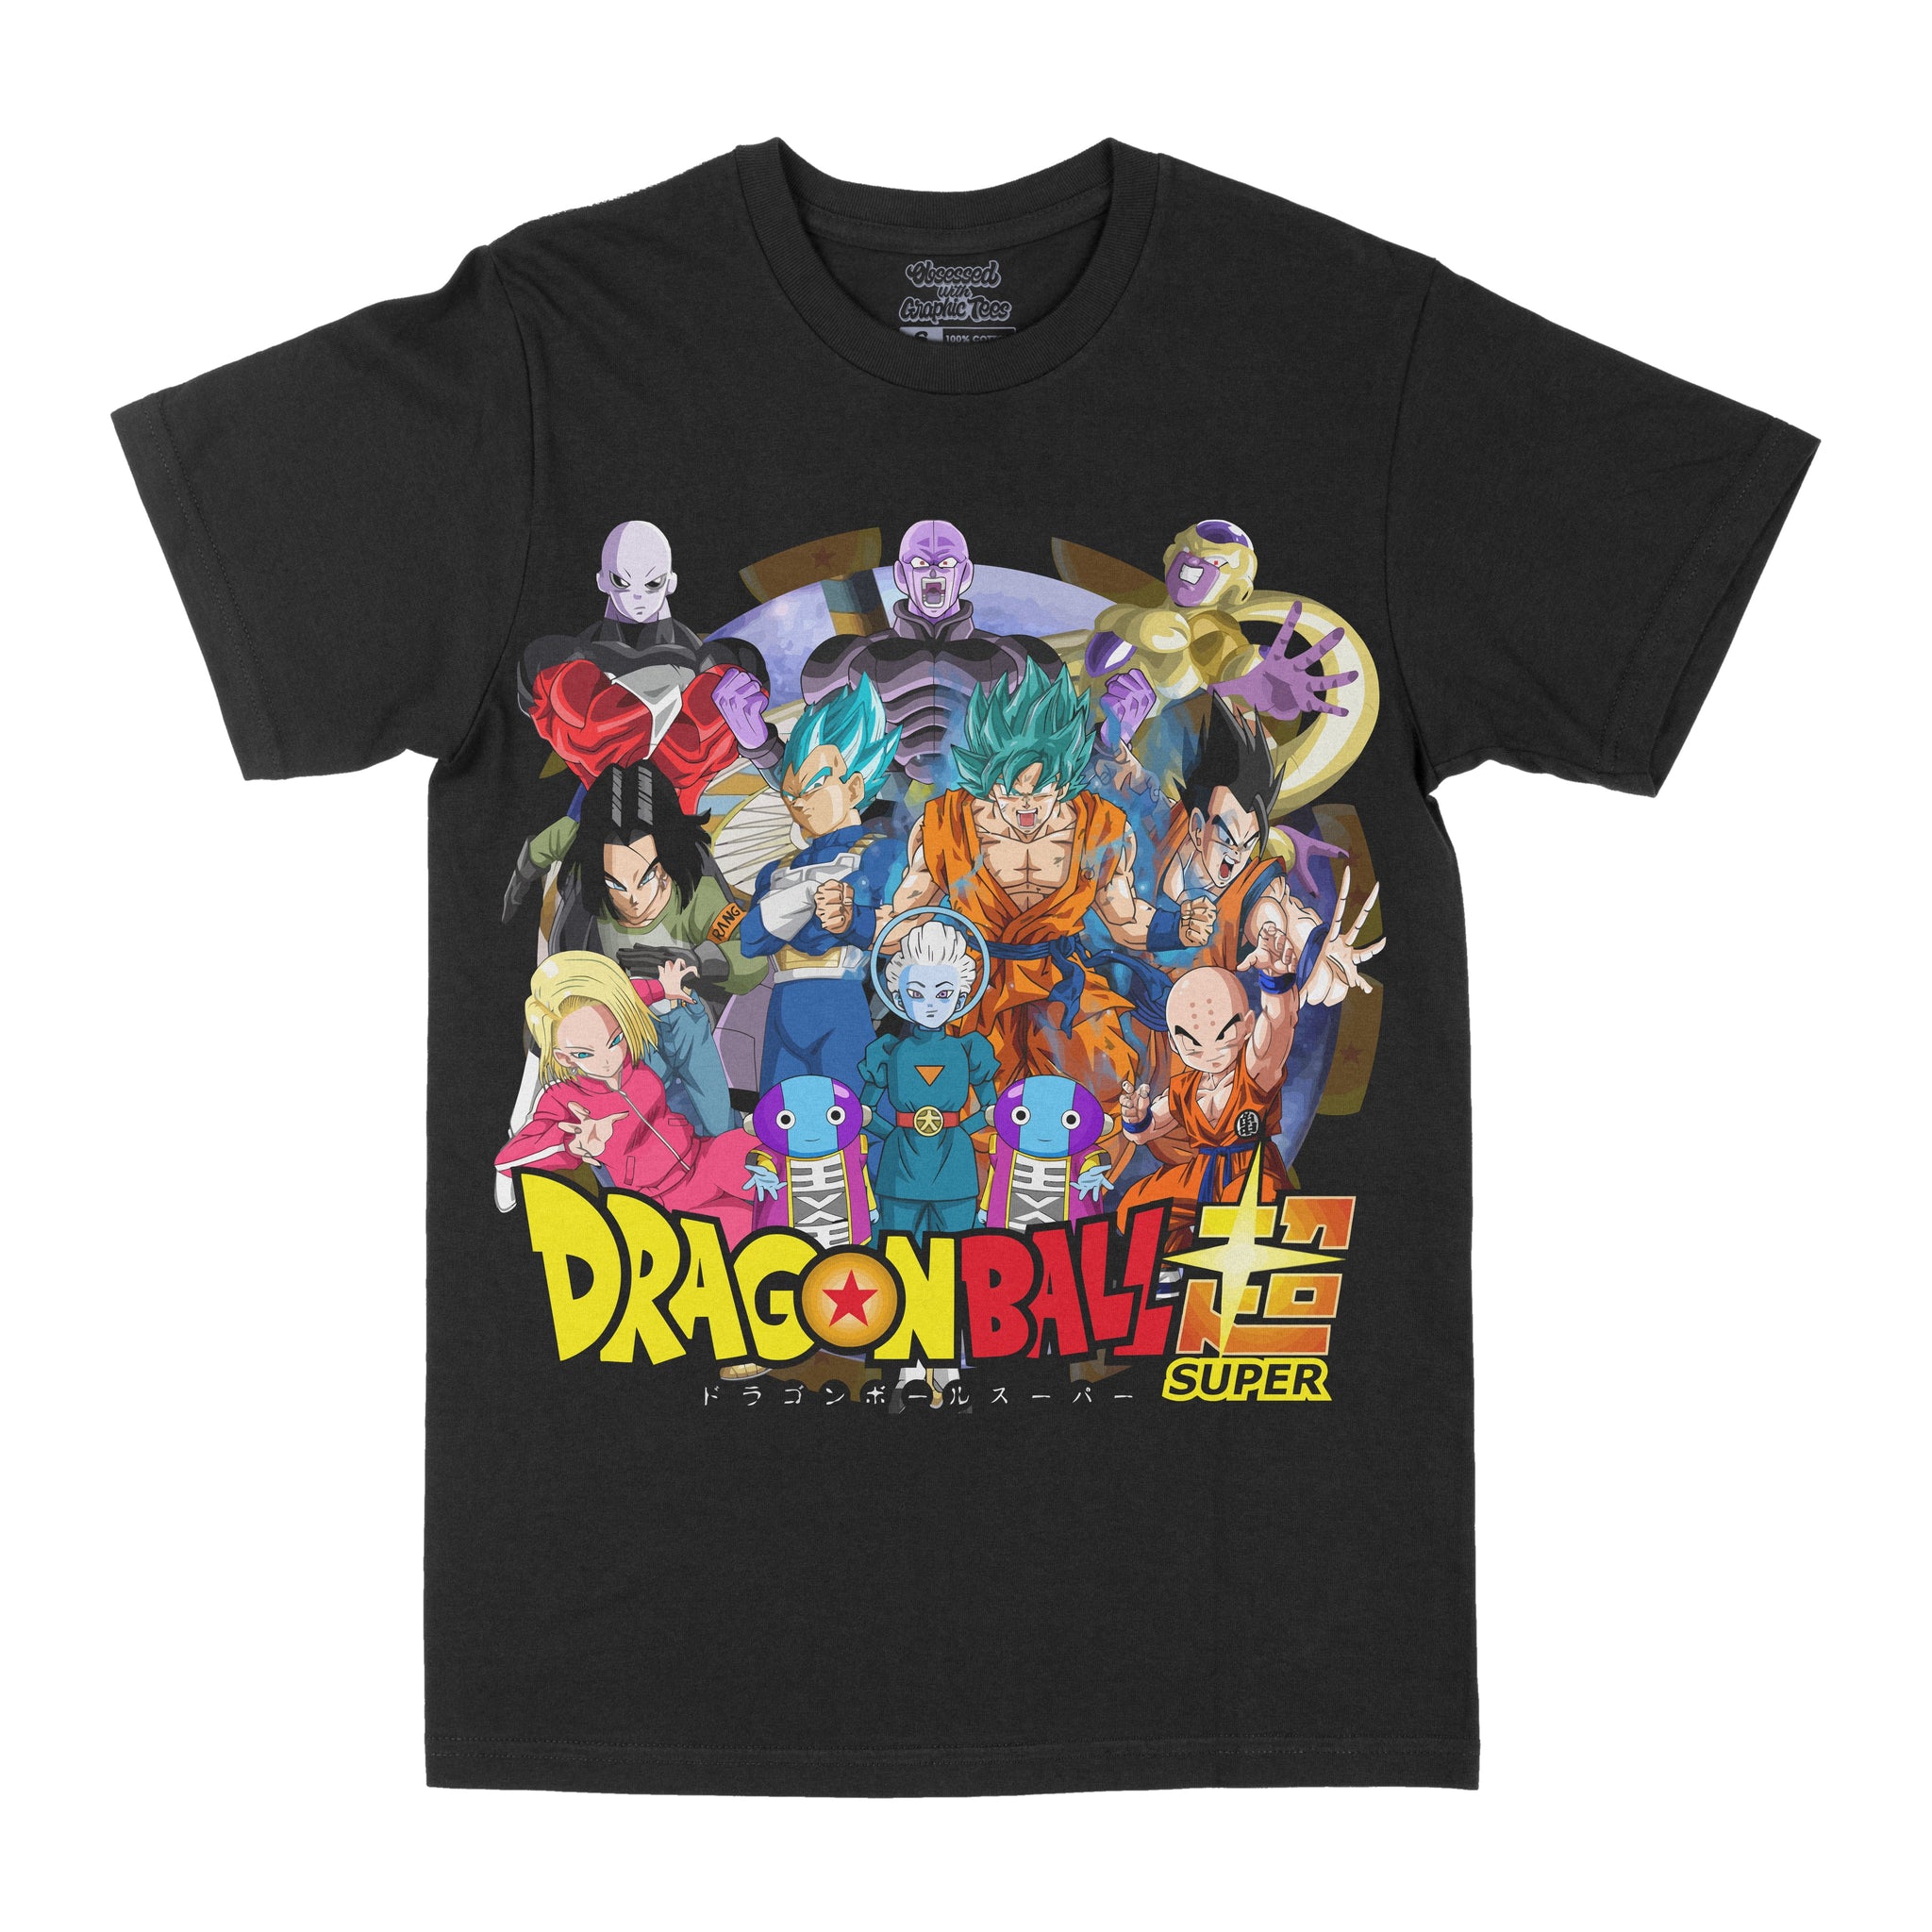 Dragonball Z Super Graphic Tee